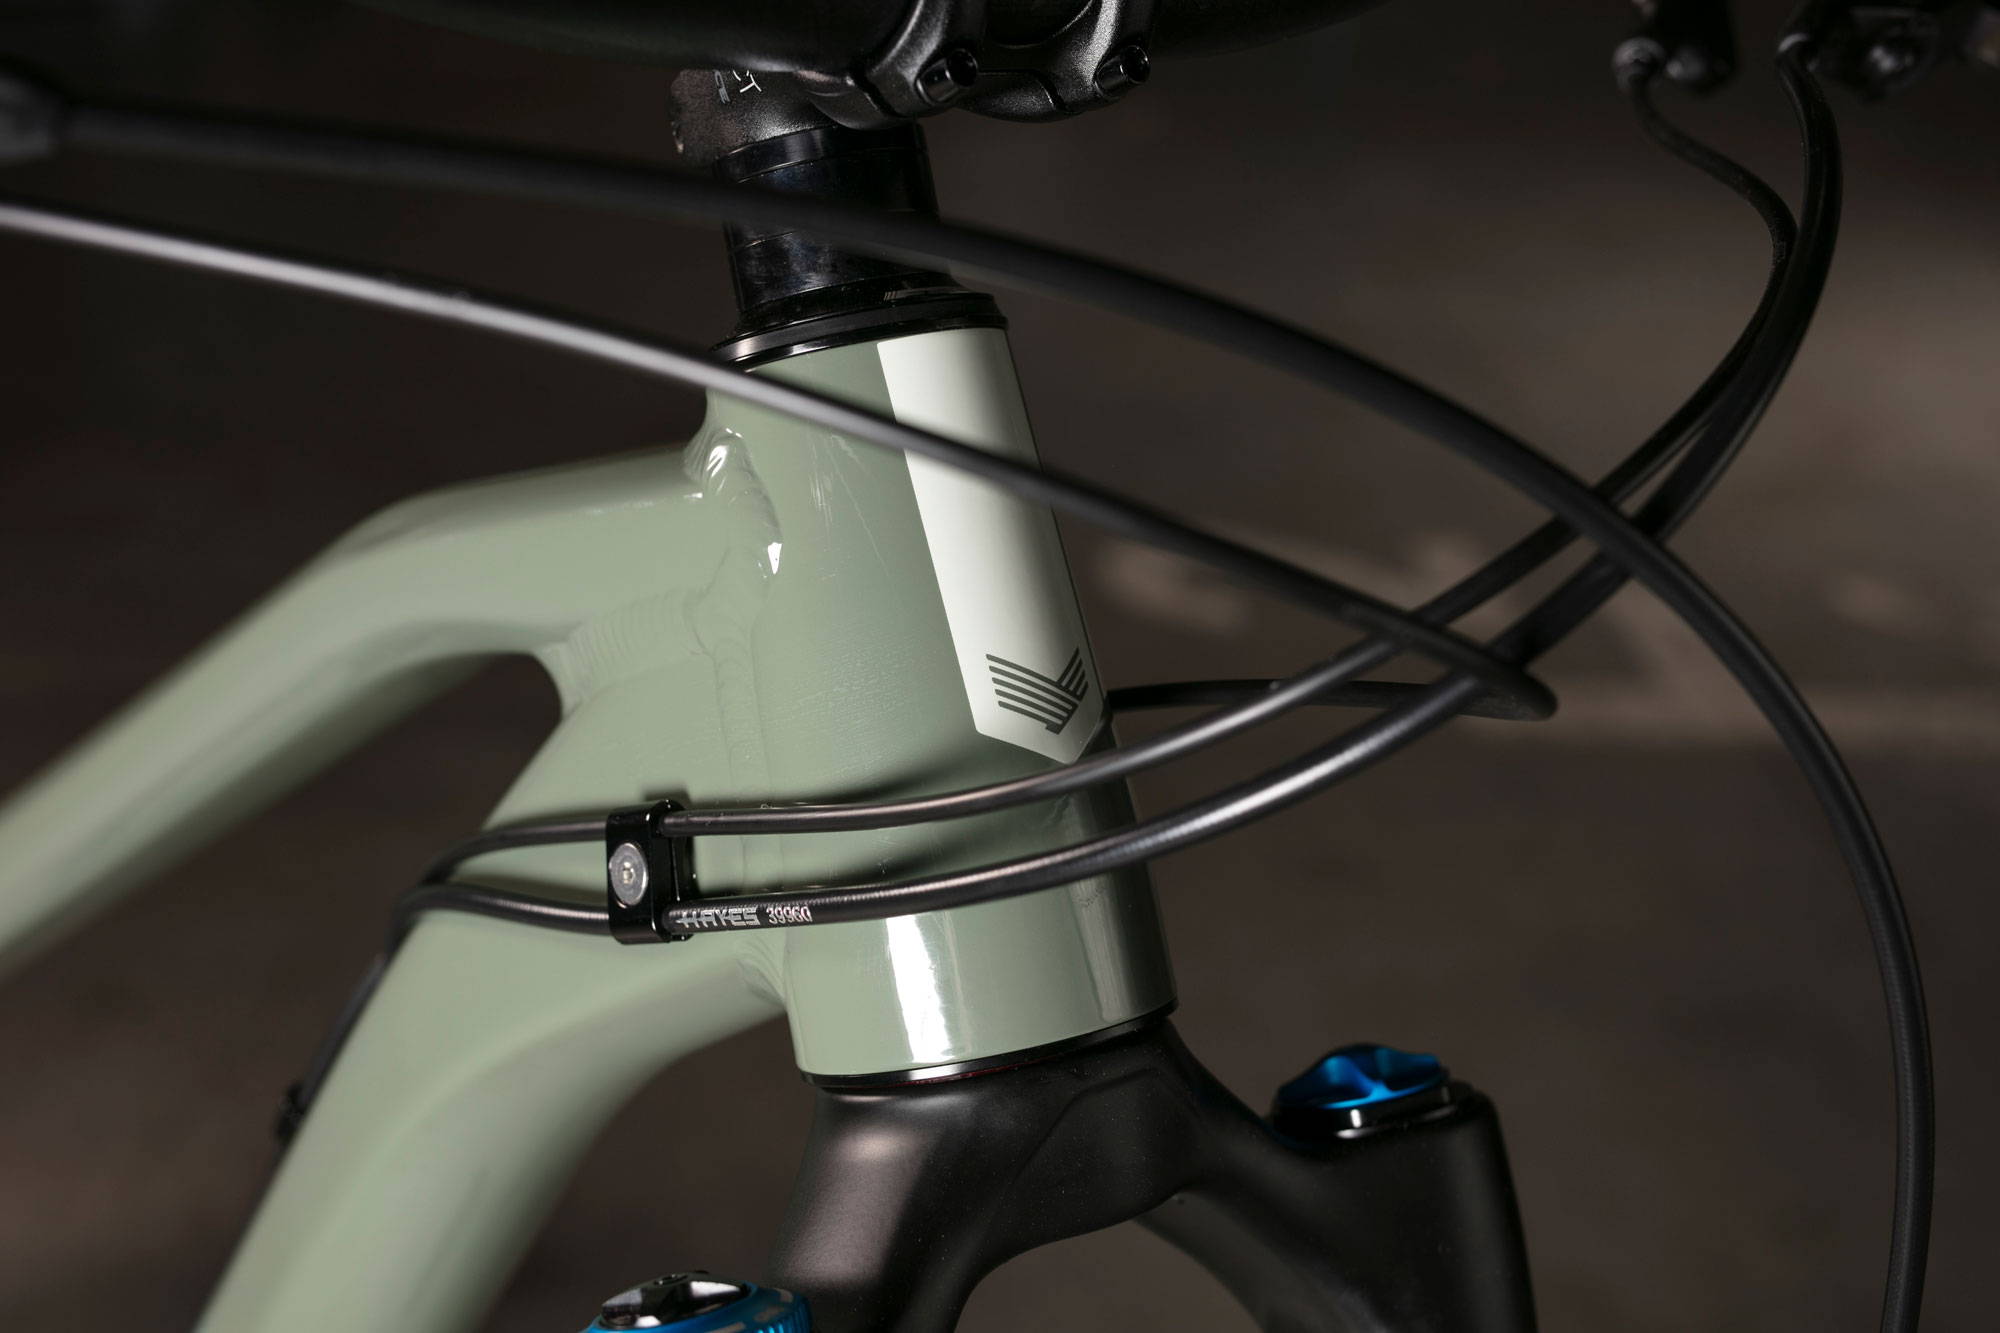 External cable routing on Privateer 161 headtube